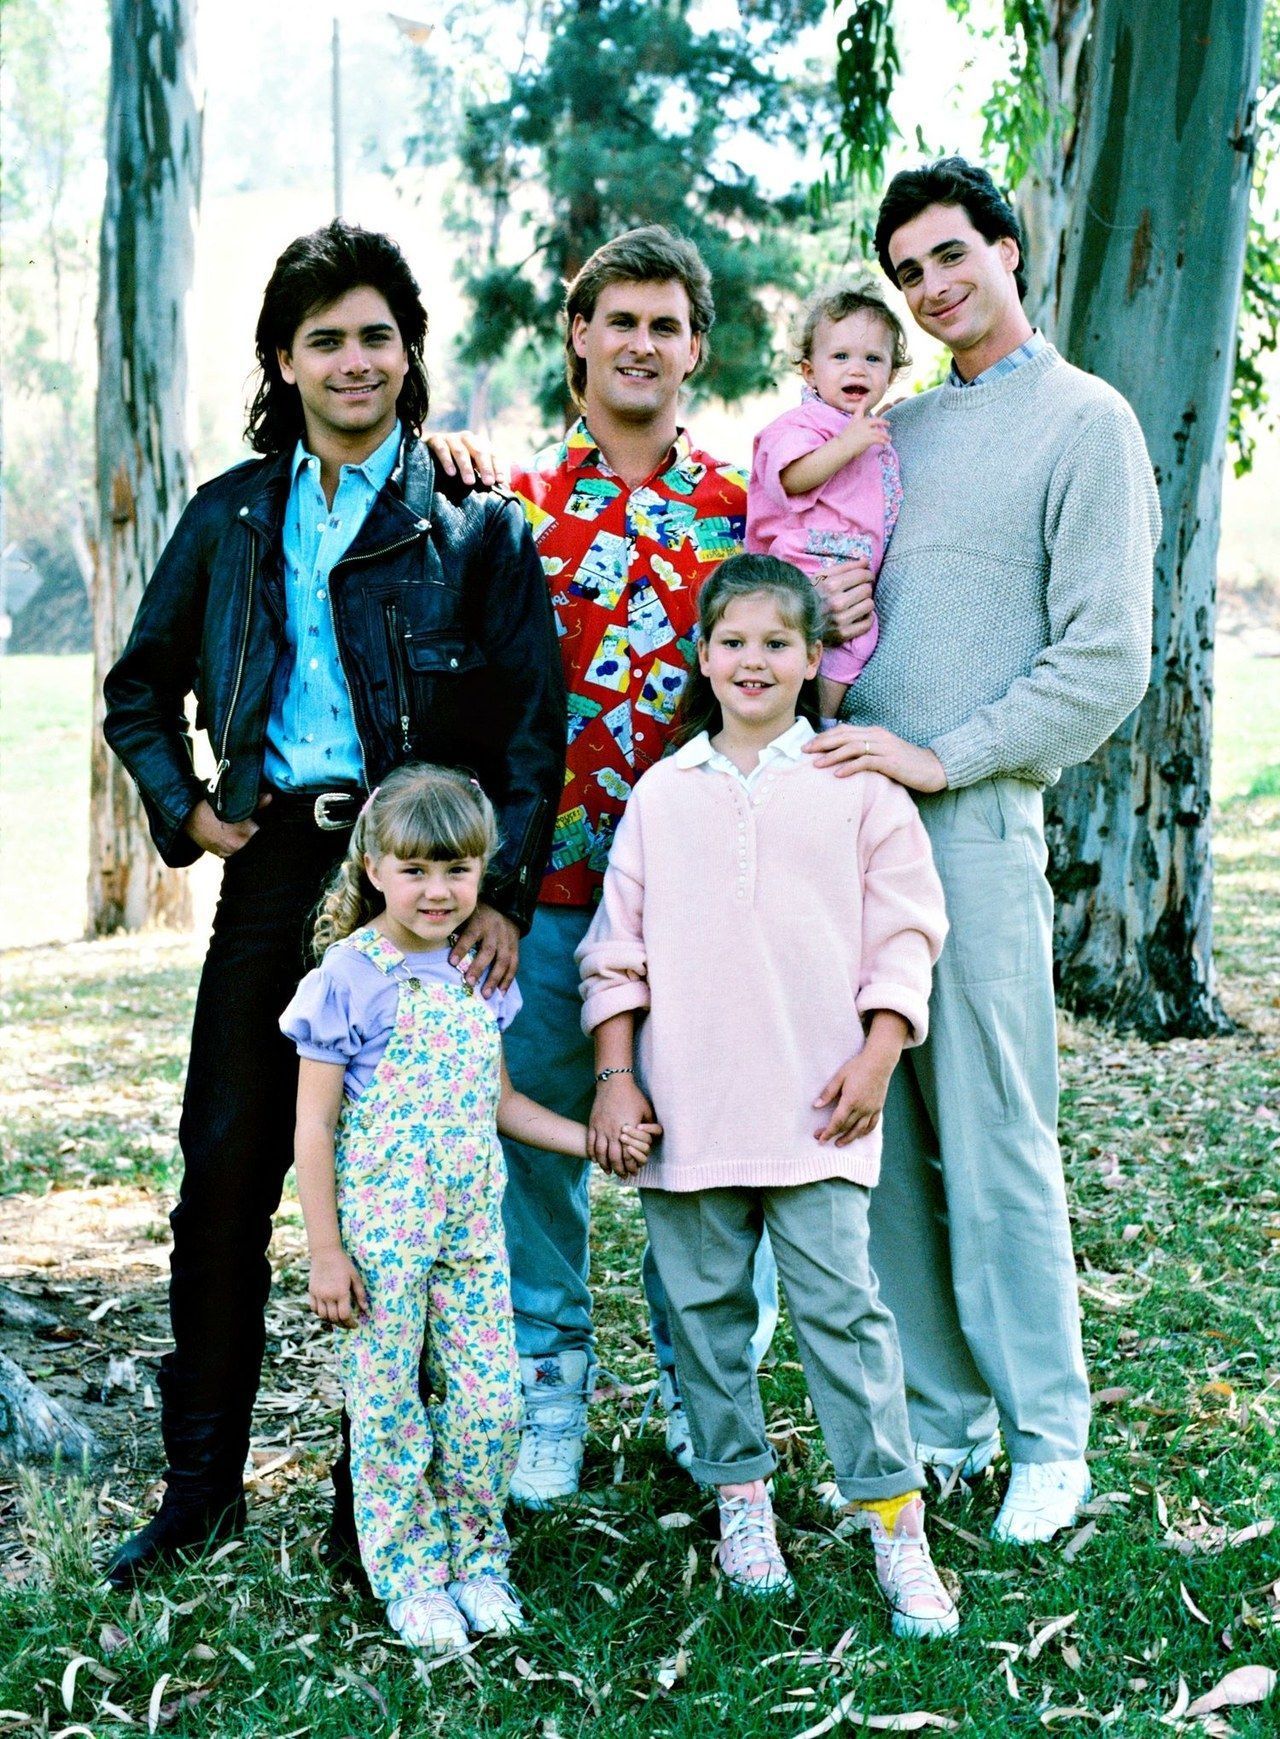 full house premiere 1987 bob saget john stamos dave coulier jodie sweetin candace cameron olsen twins